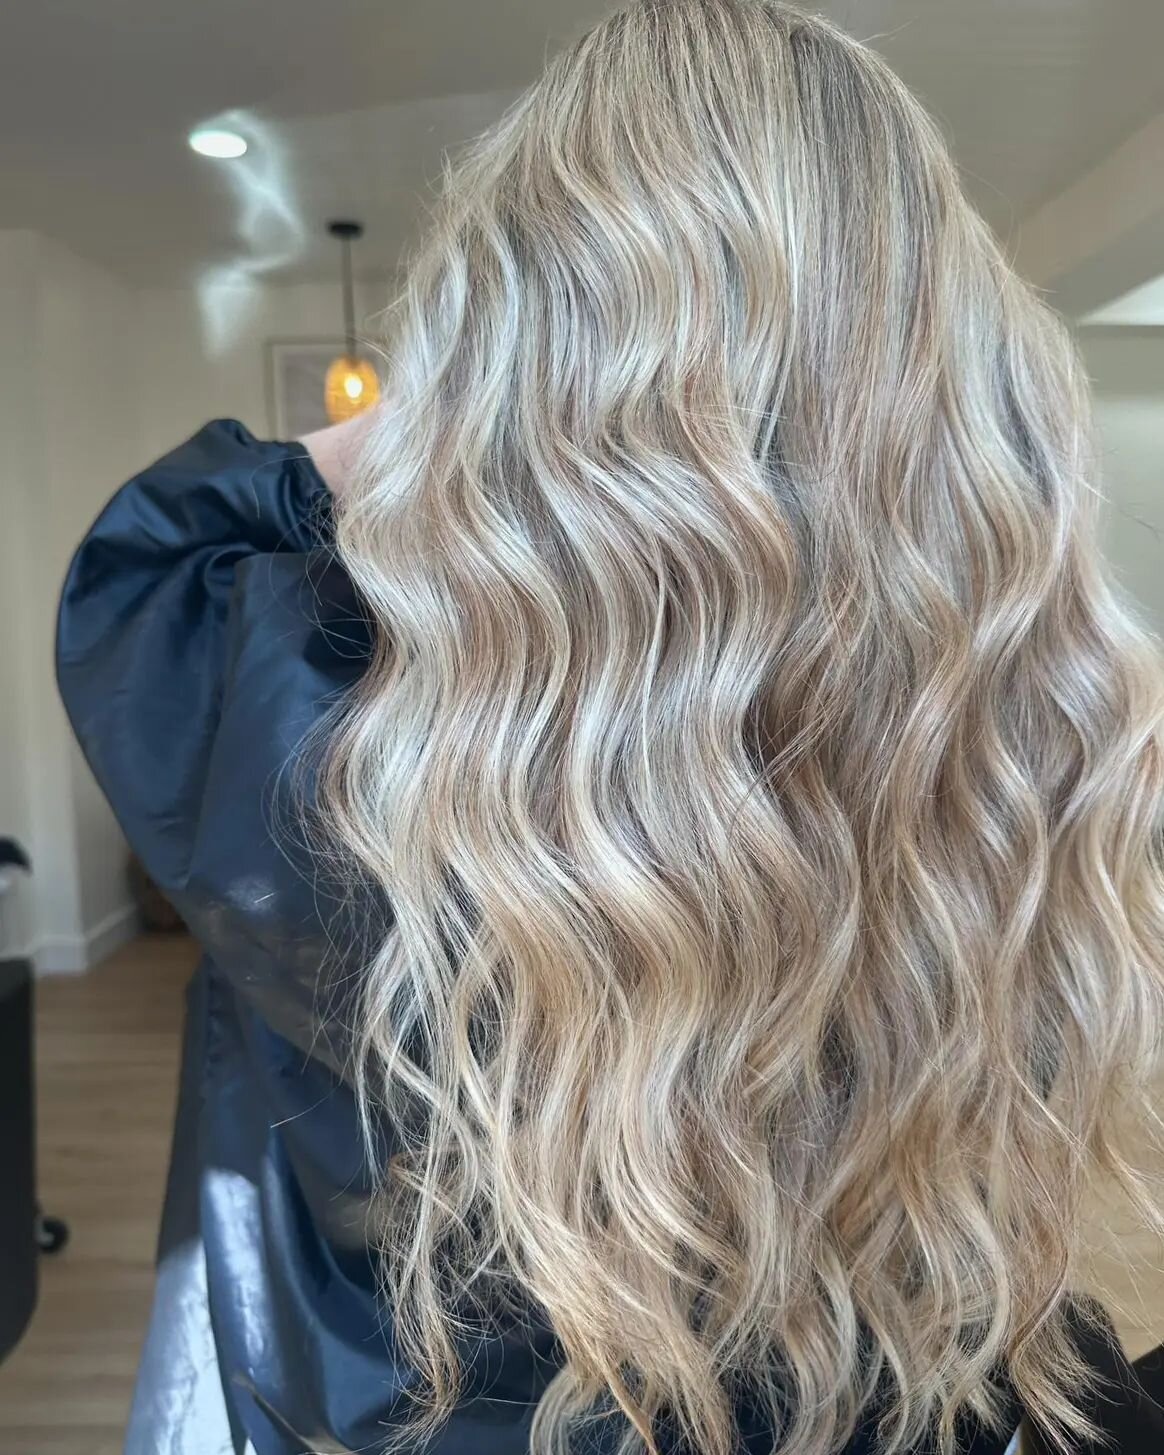 Blonde but with lil hints of copper lows 👀 ⁣
Emily nailed this one!! ⁣
⁣
@emilyfaith.beauty ⁣
⁣
If you would like to book with Em you can find her contact info in the highlights section under her name! ⁣
⁣
For general inquiries: ⁣
📞 705-209-6729⁣
✉